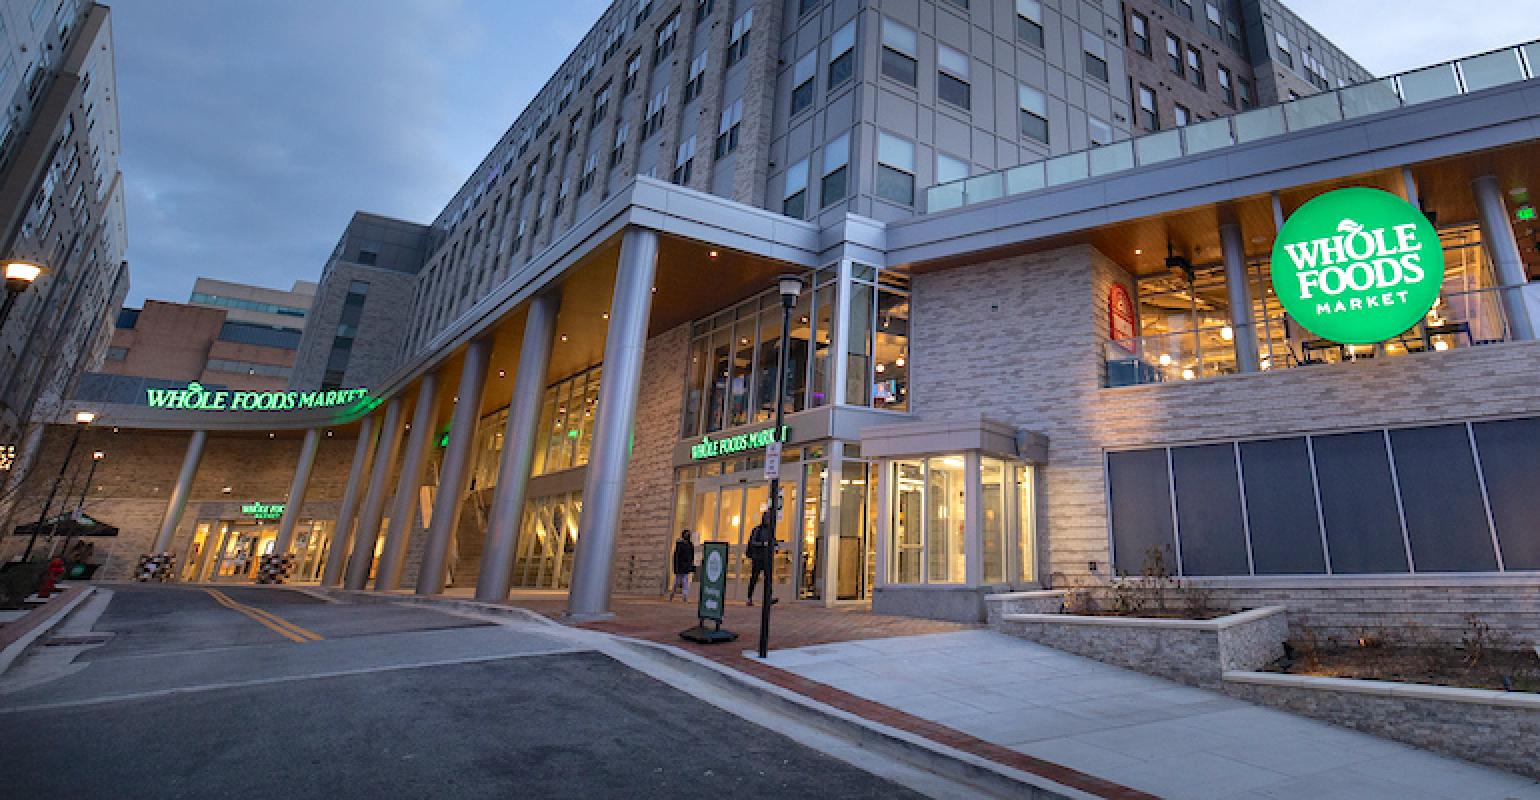 https://www.supermarketnews.com/sites/supermarketnews.com/files/styles/article_featured_retina/public/Whole_Foods_store-Towson_MD-opened_Jan2022.jpg?itok=thzgfMw7